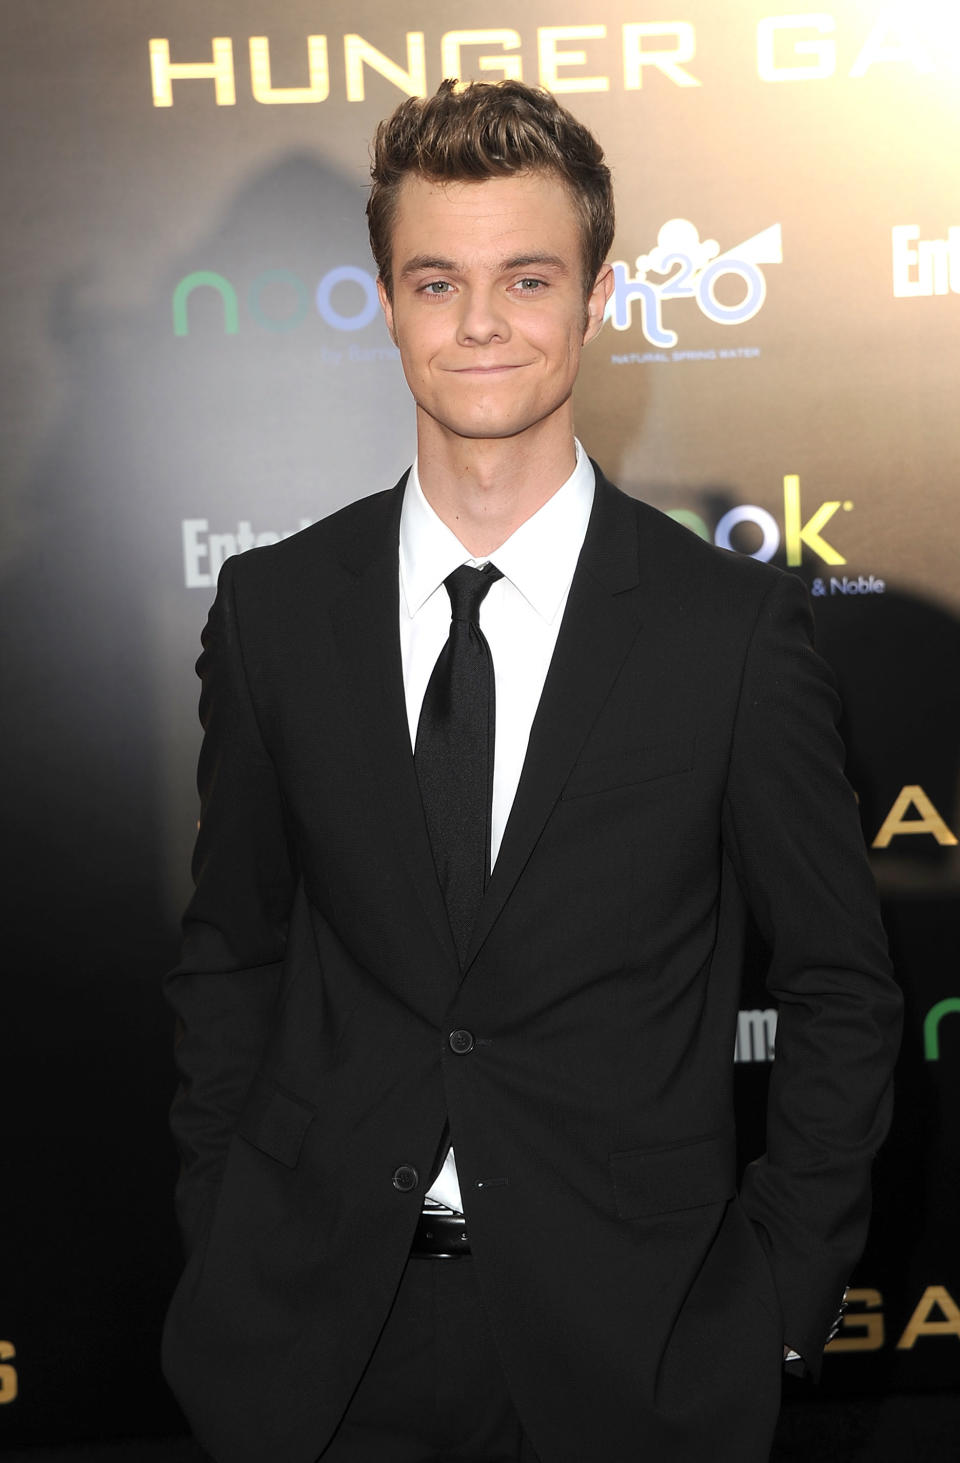 Jack Quaid brings a bit of Hollywood legacy to his role as Marvel, one of the tributes who competes in the Hunger Games. His parents are Meg Ryan and Dennis Quaid. The movie marks the feature film debut for the 19-year-old, currently a sophomore at the Experimental Theatre Wing at New York University’s Tisch School of Arts. (Jason Merritt/Getty Images)